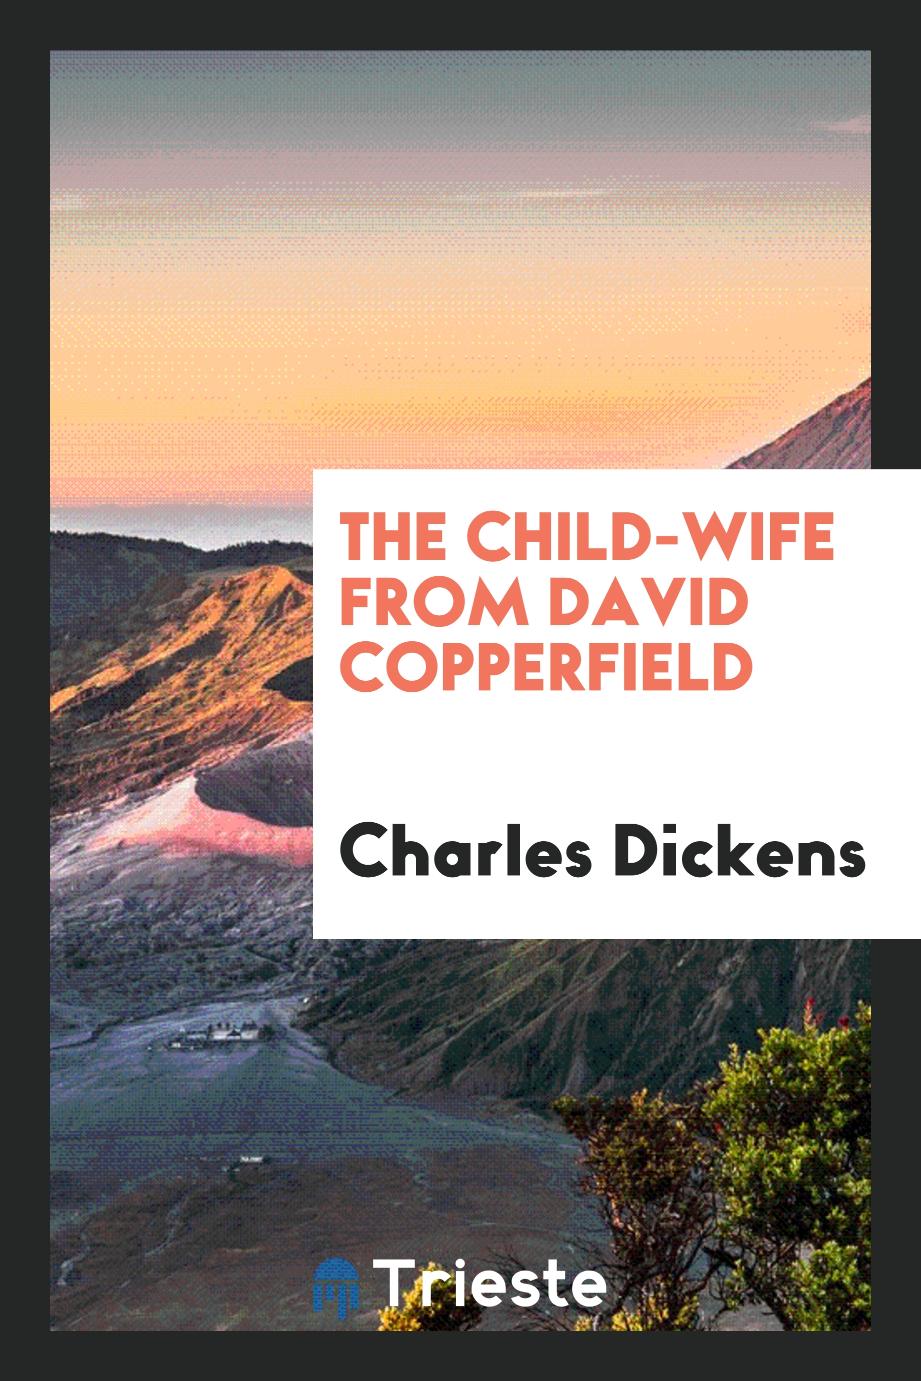 The Child-Wife from David Copperfield